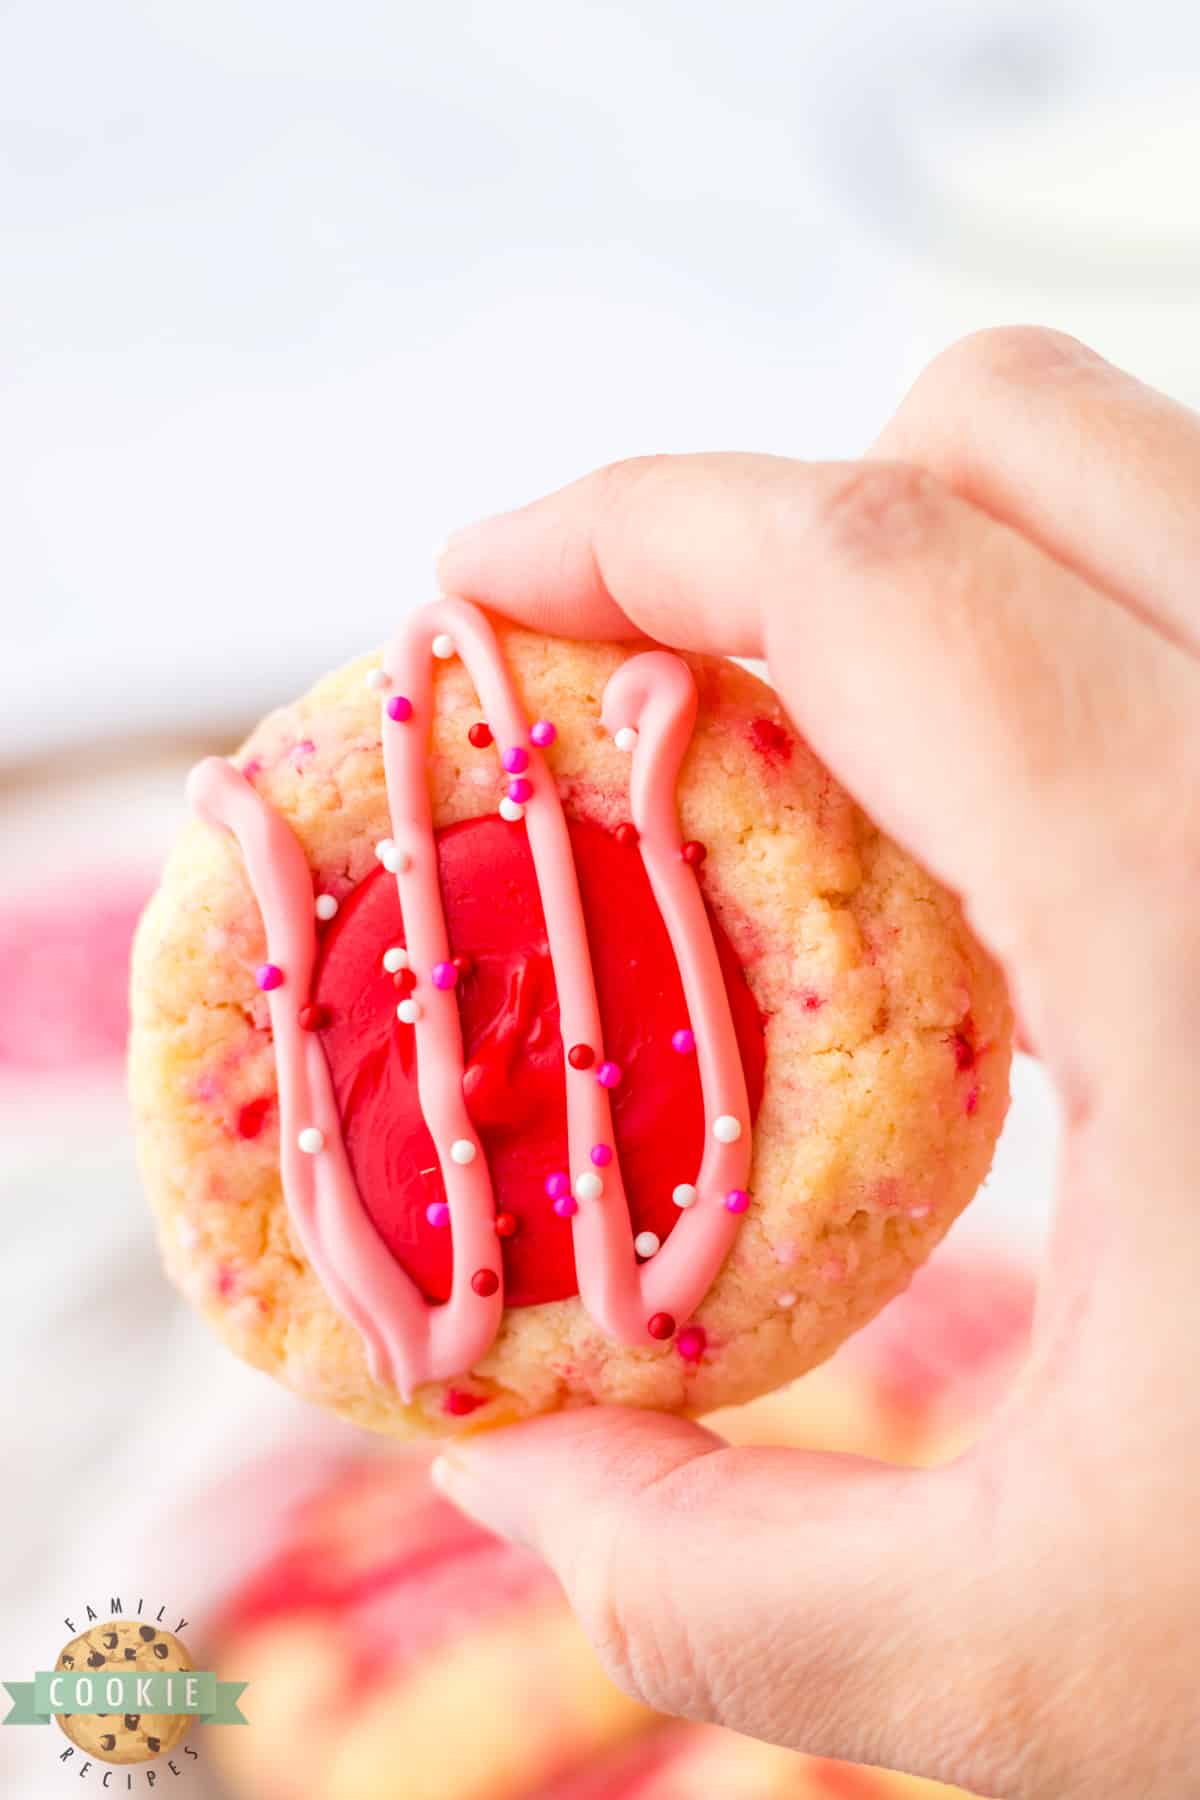 Cookie filled with melted red chocolate. 